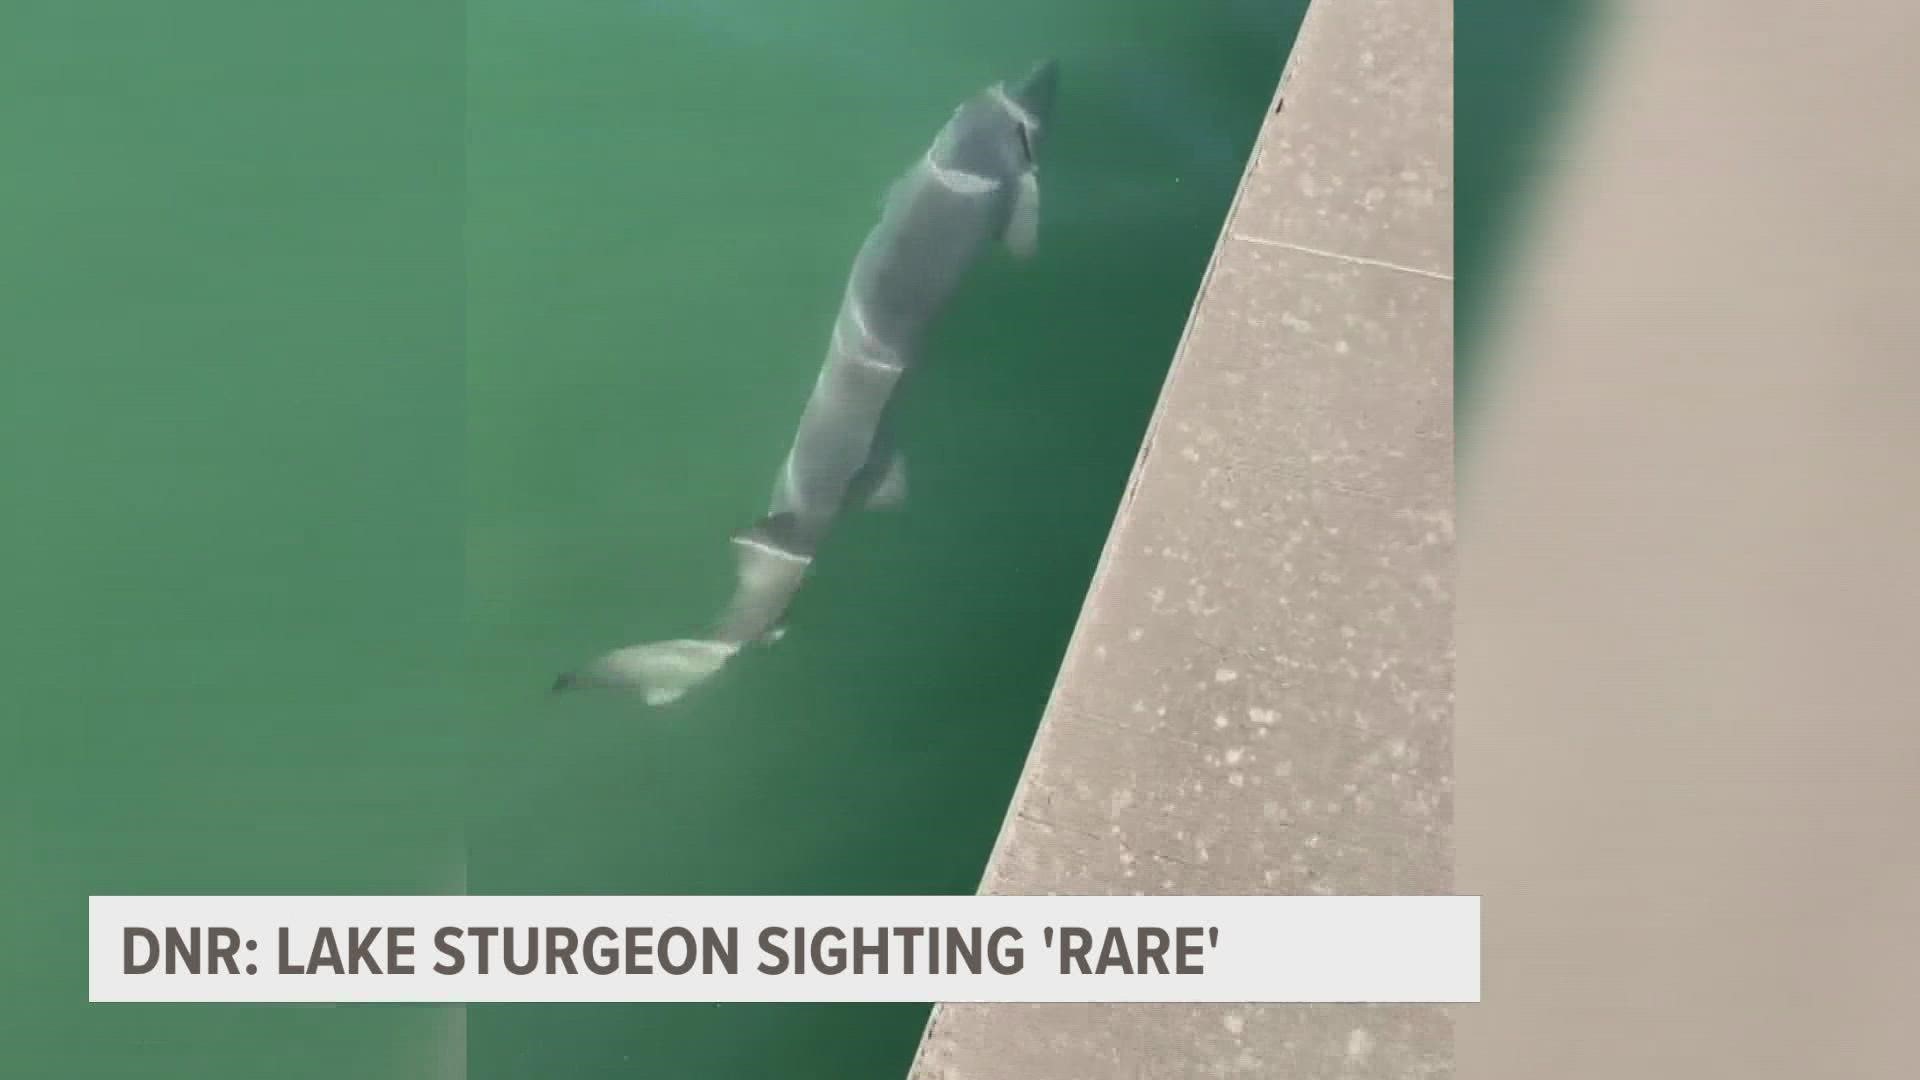 Lake Sturgeon are one of the oldest species in the Great Lakes and seeing one is a rare, but if you do see one it's likely around this time of year.